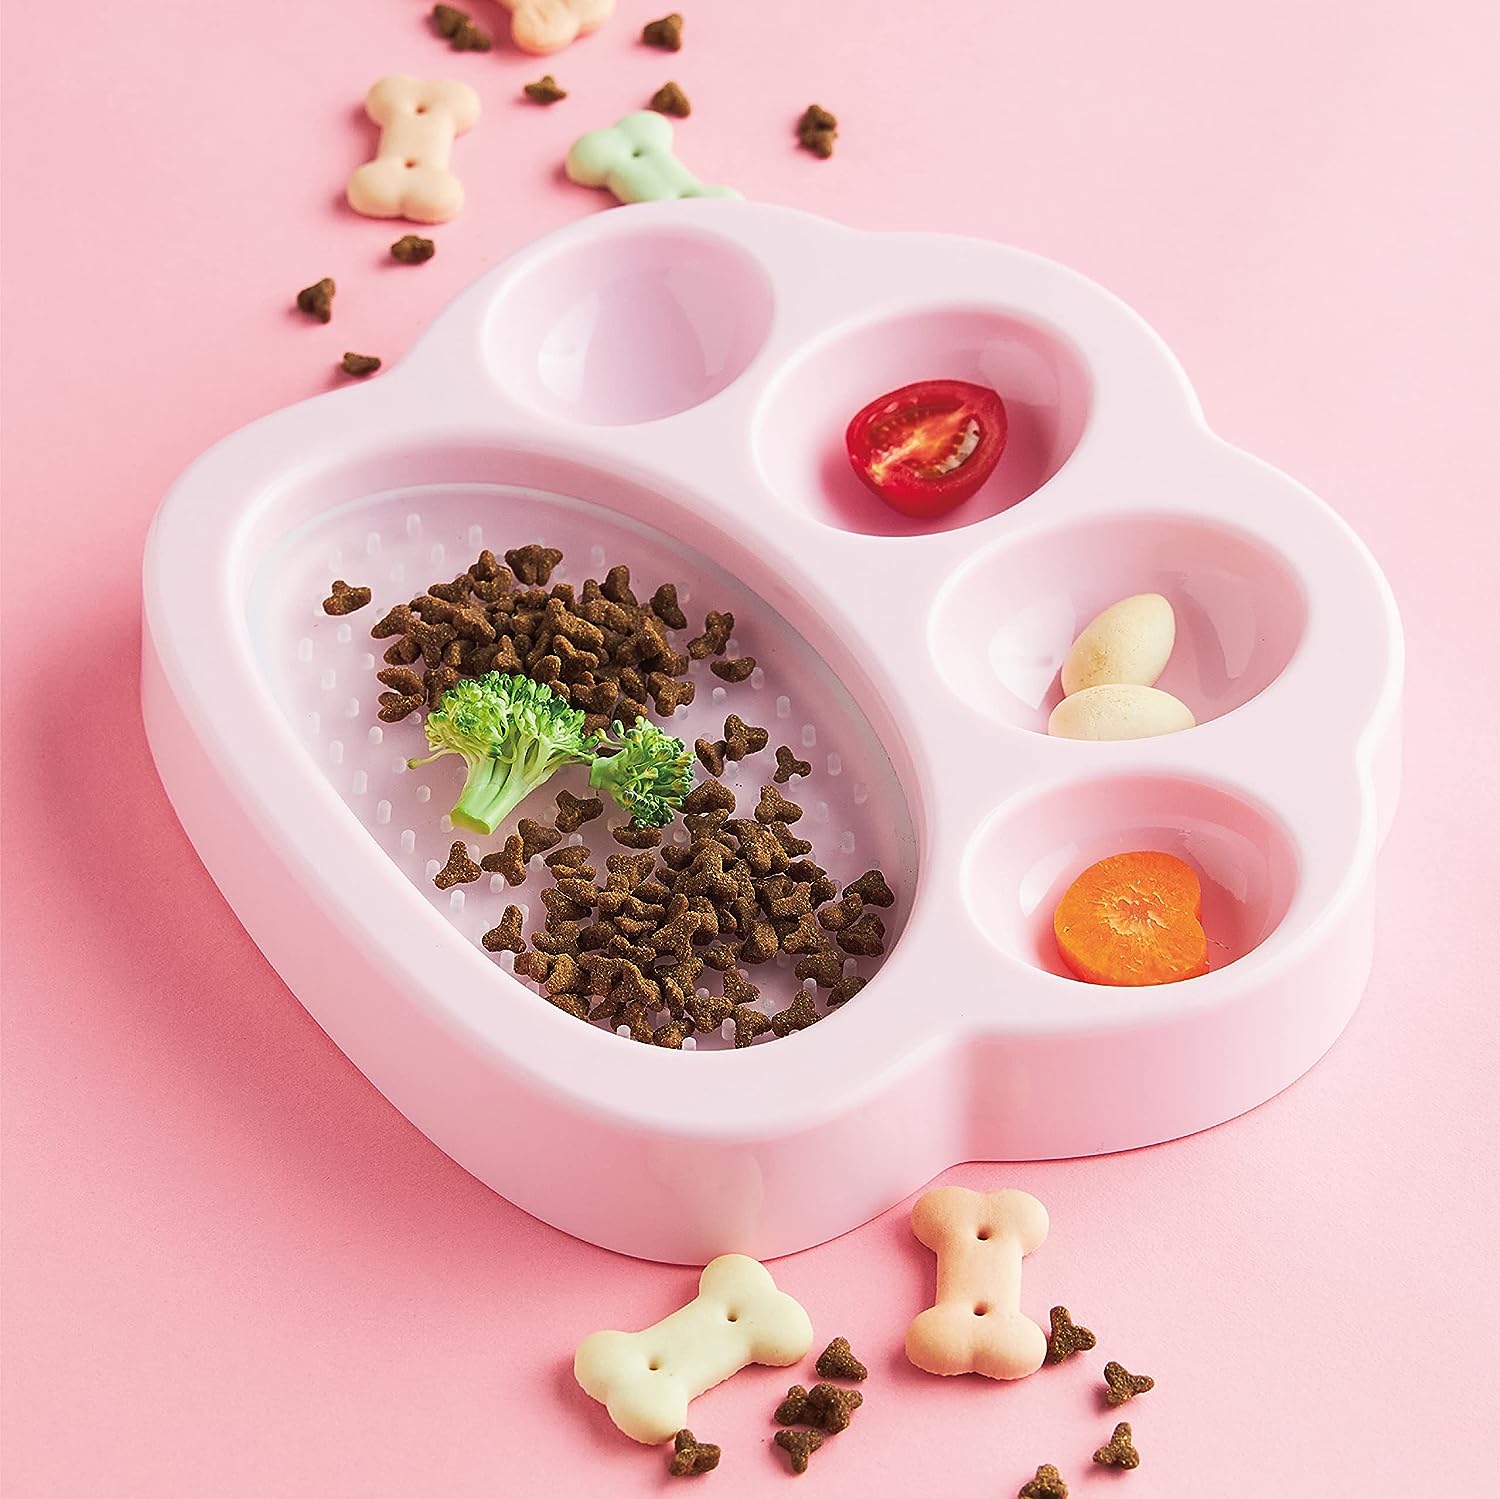 PetDreamHouse PAW 2-IN-1 Mini Slow Feeder & Lick Pad Baby Pink Easy